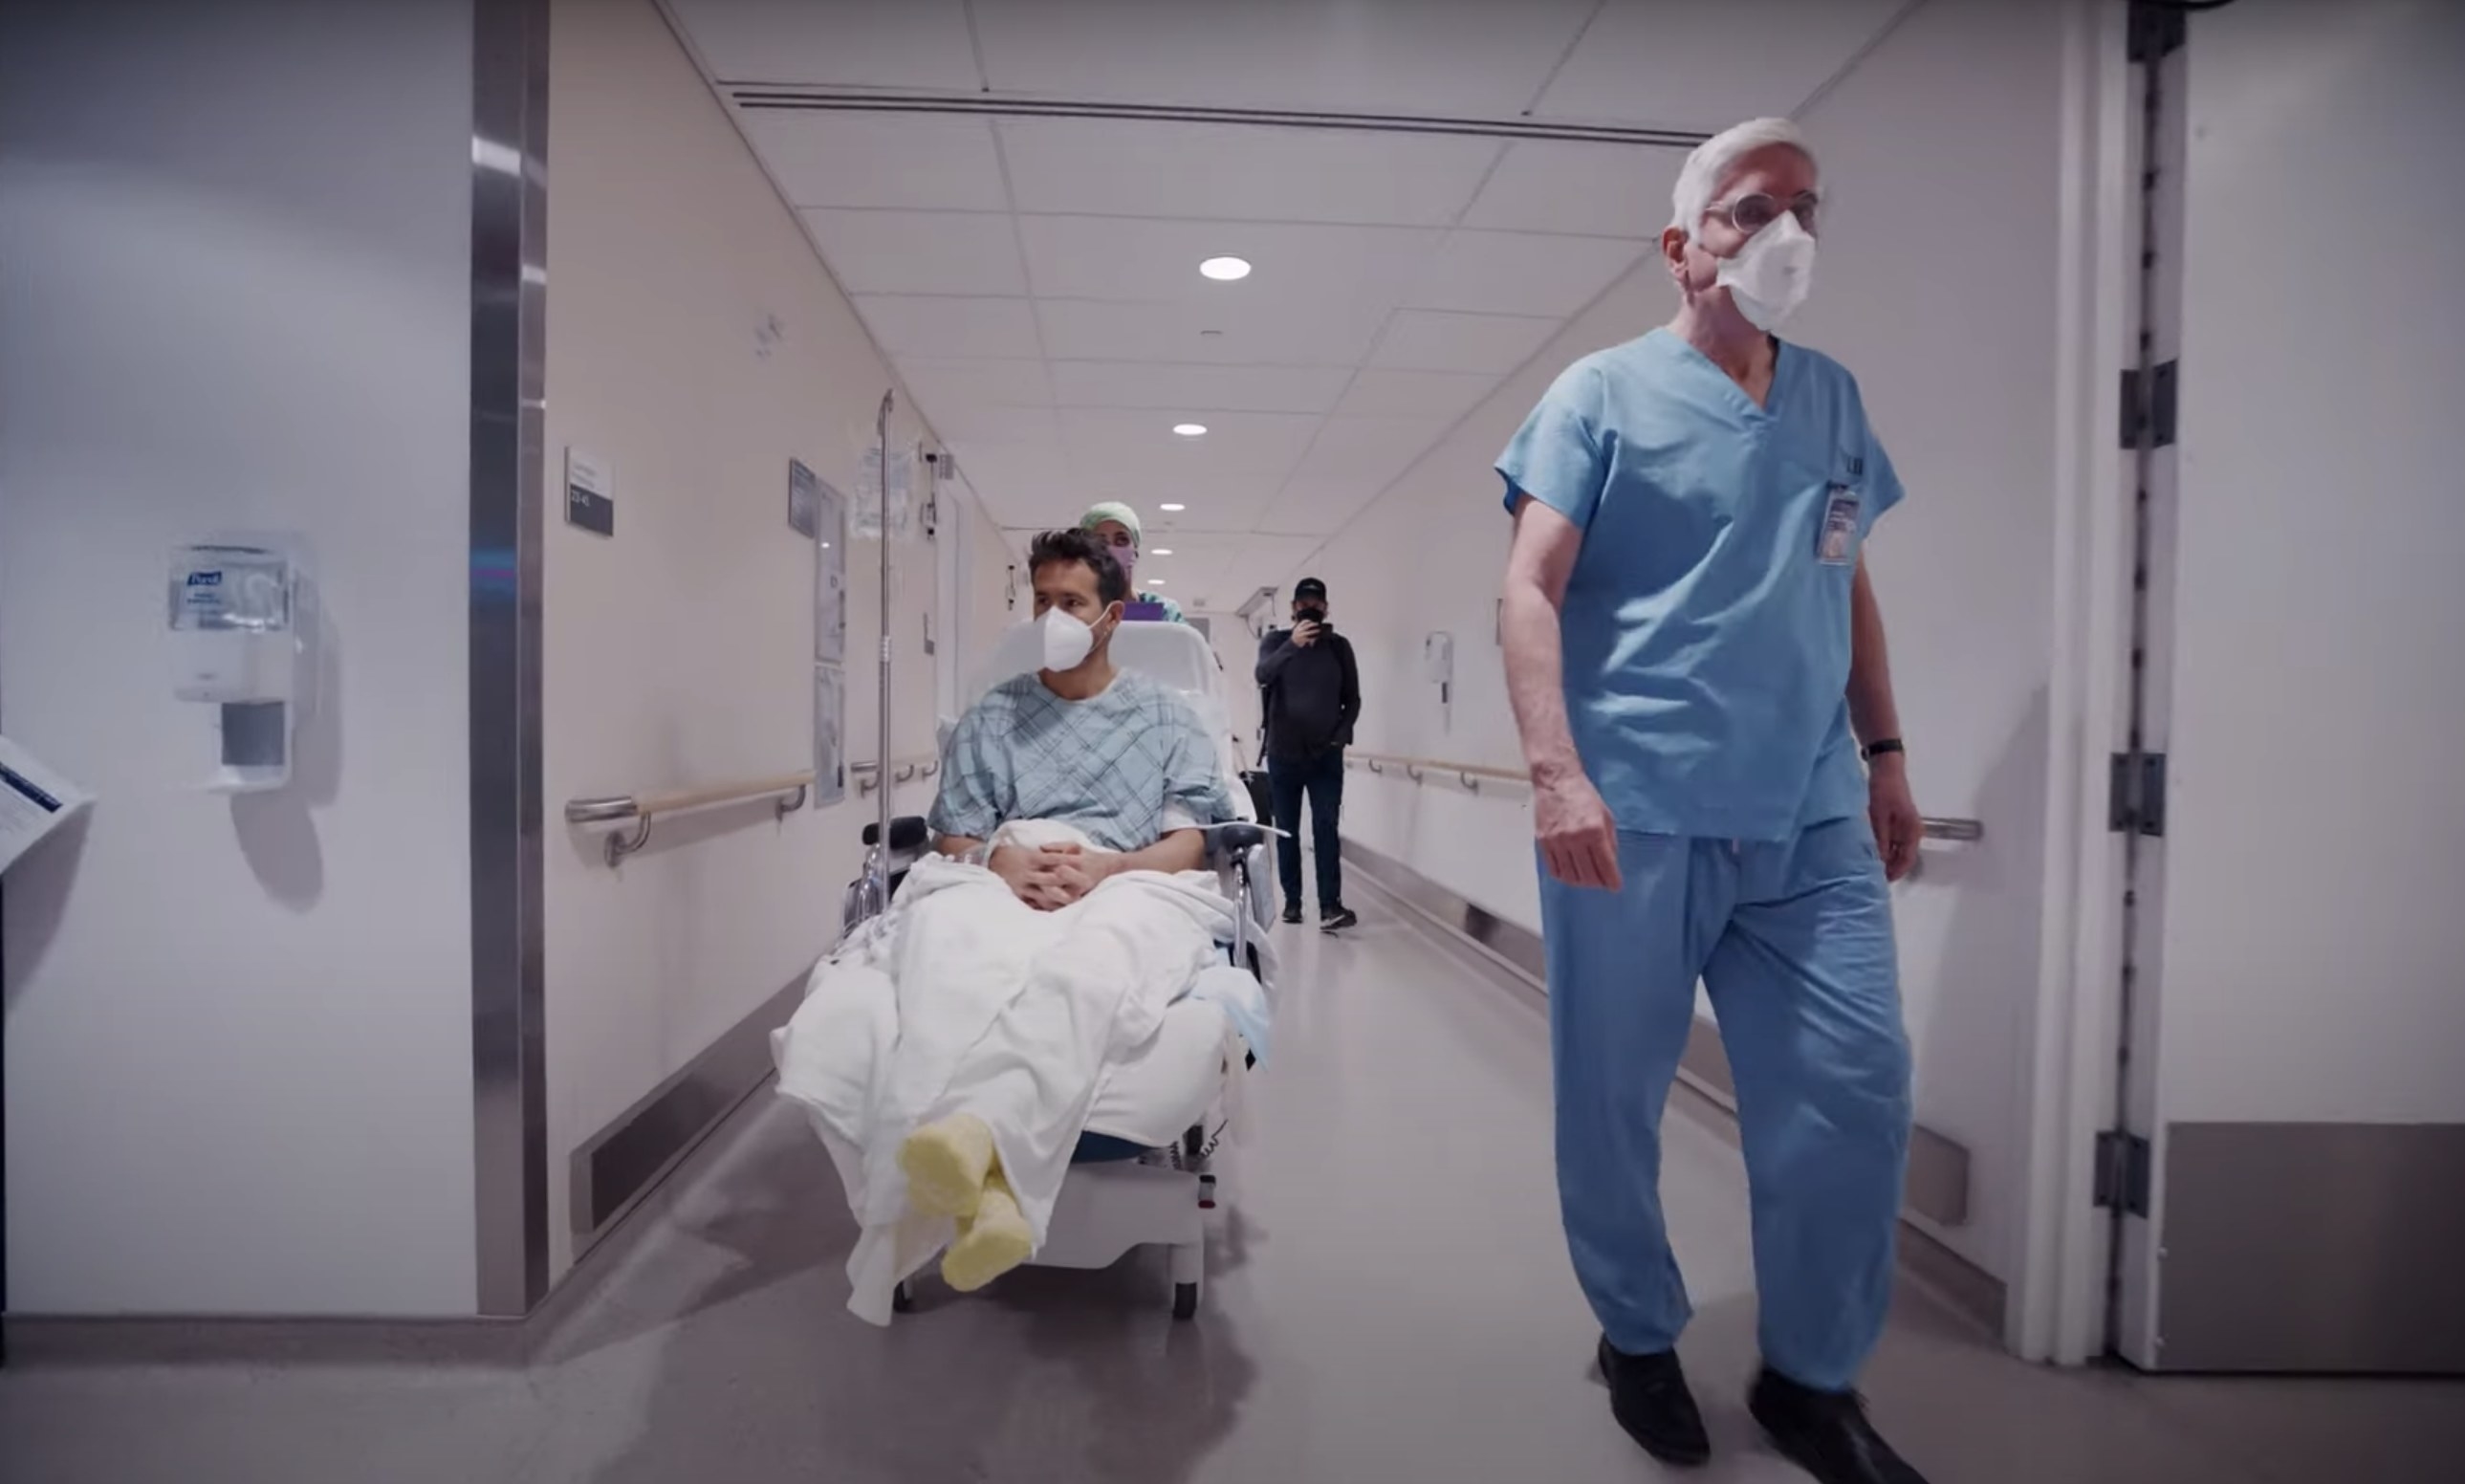 A doctor walks next to Ryan as he is wheeled through a hospital